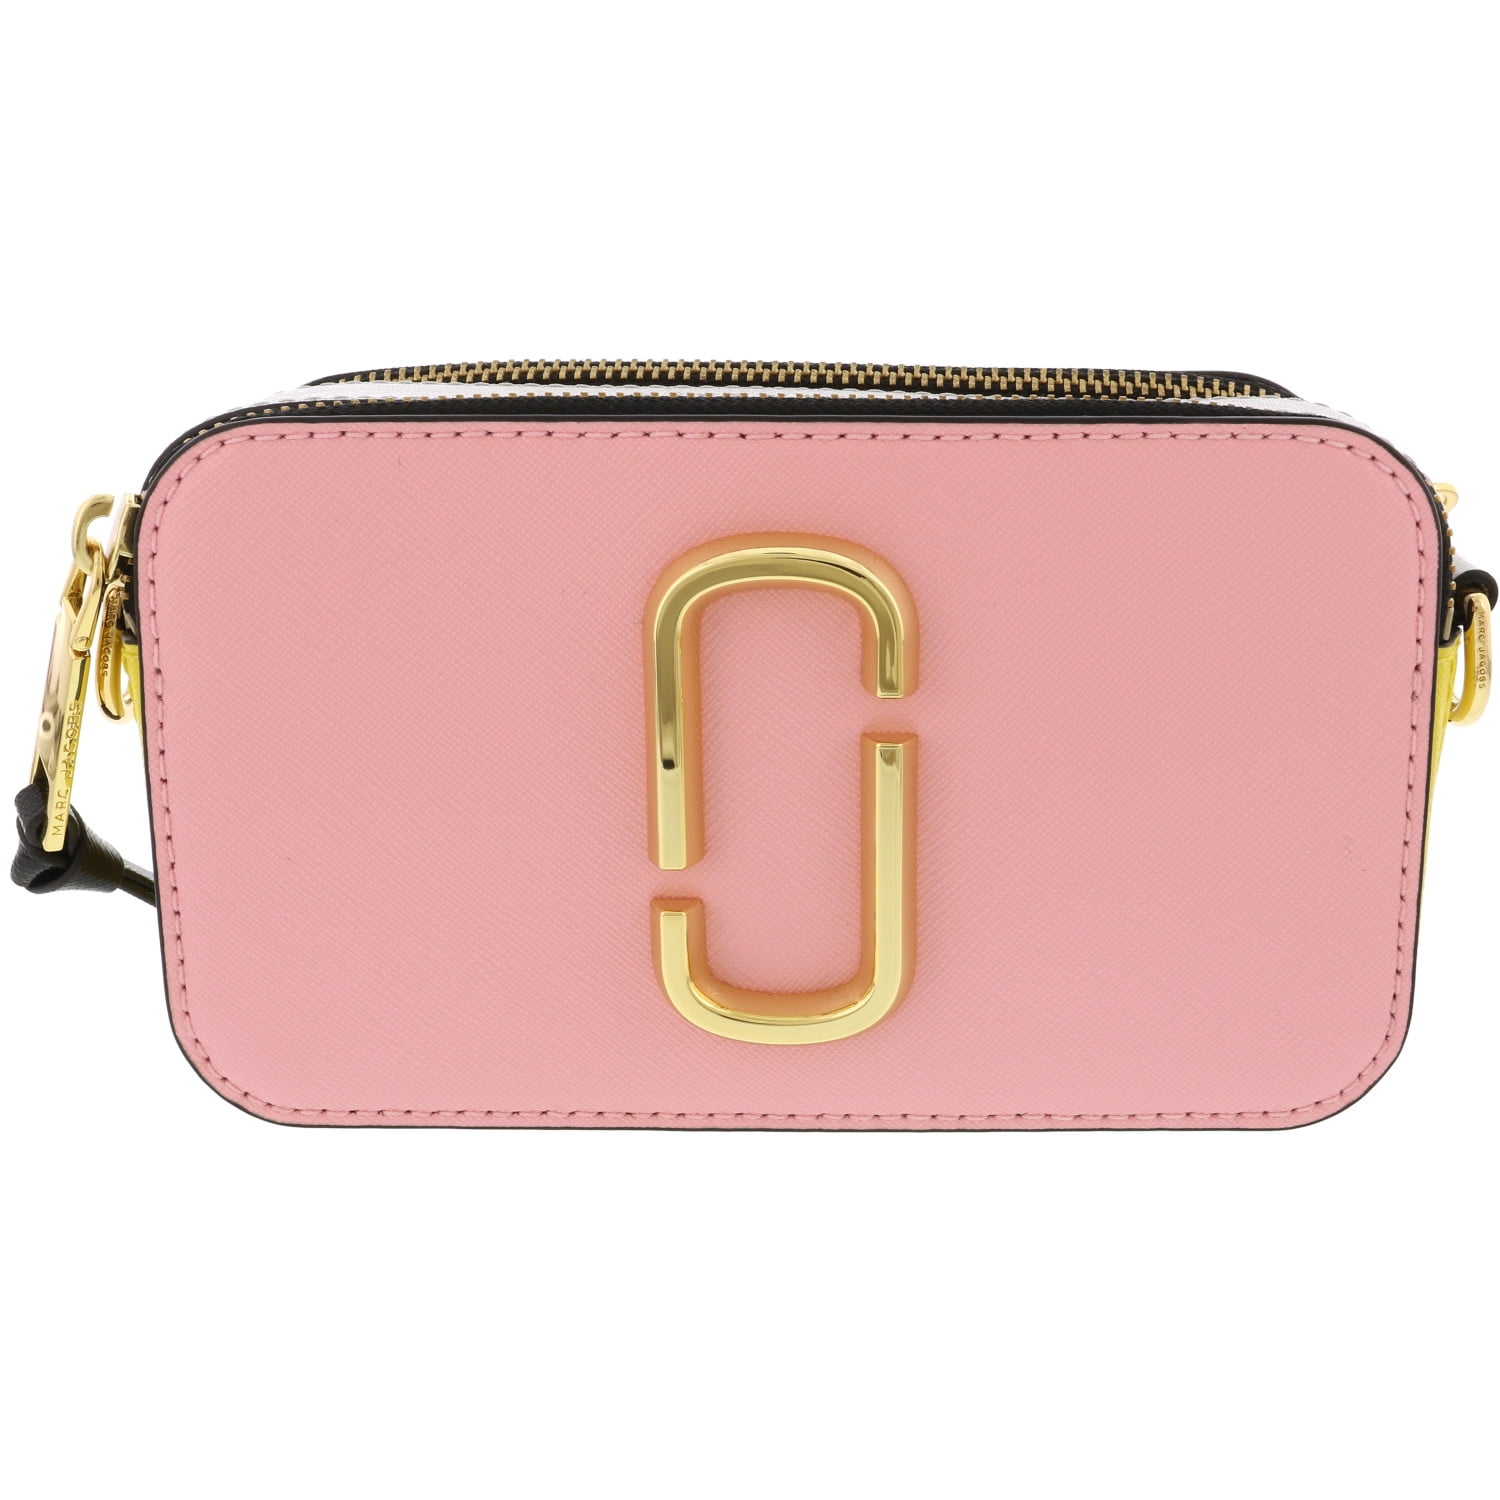 Borse a tracolla Marc Jacobs - Borsa The Snapshot colore New Baby Pink -  M0012007682